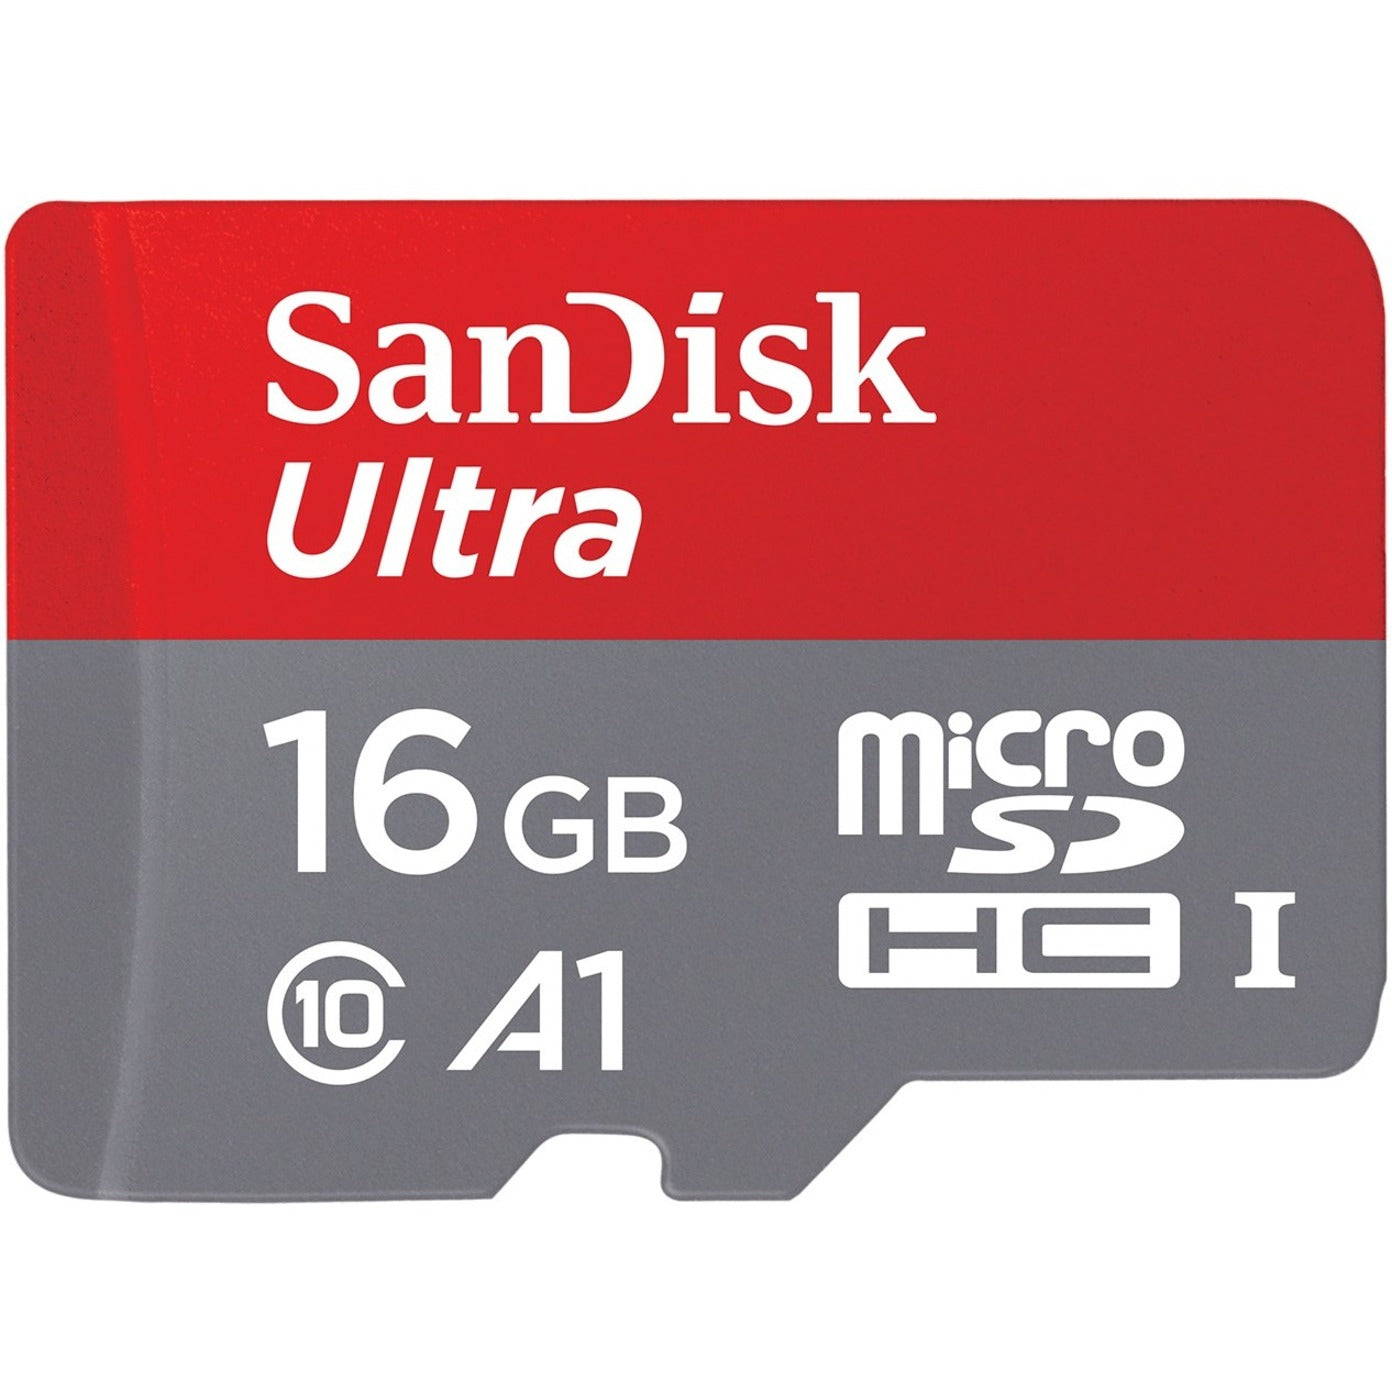 SanDisk SDSQUNC-016G-AN6MA Ultra microSDHC UHS-I Card with Adapter - 16GB, 10 Year Limited Warranty